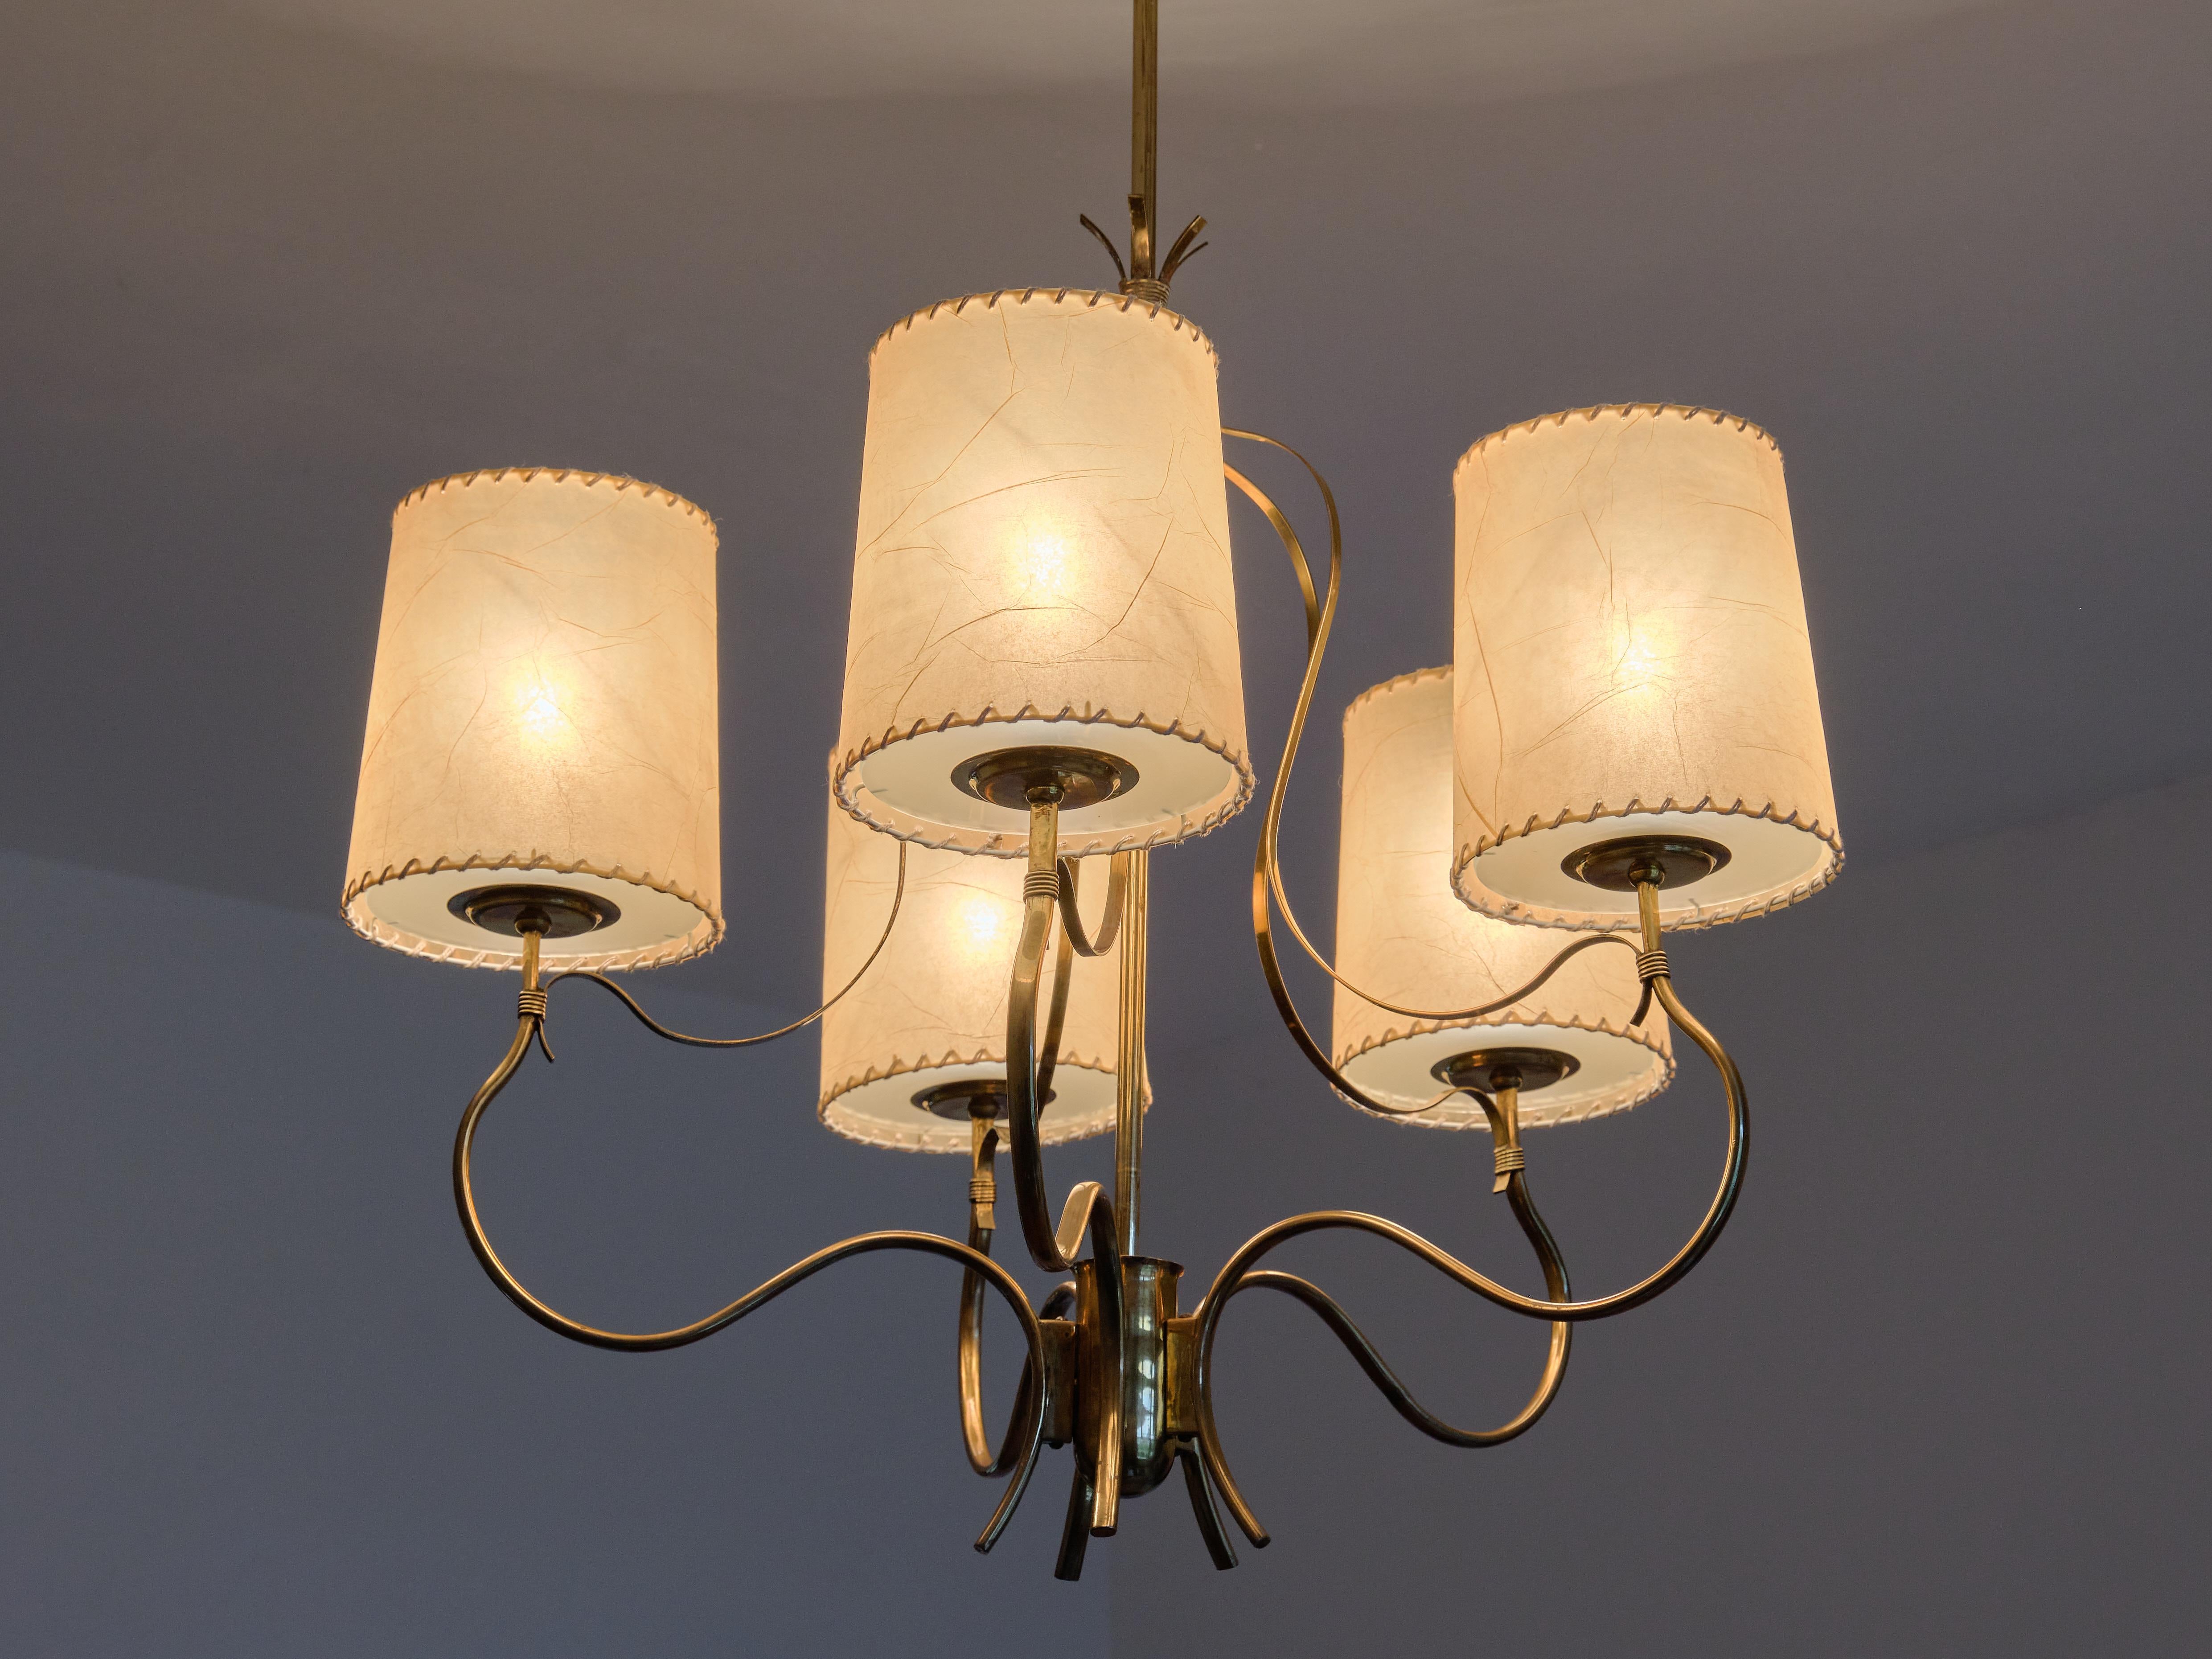 Paavo Tynell Chandelier in Brass and Parchment, Model 9001, Taito Finland, 1940s For Sale 1